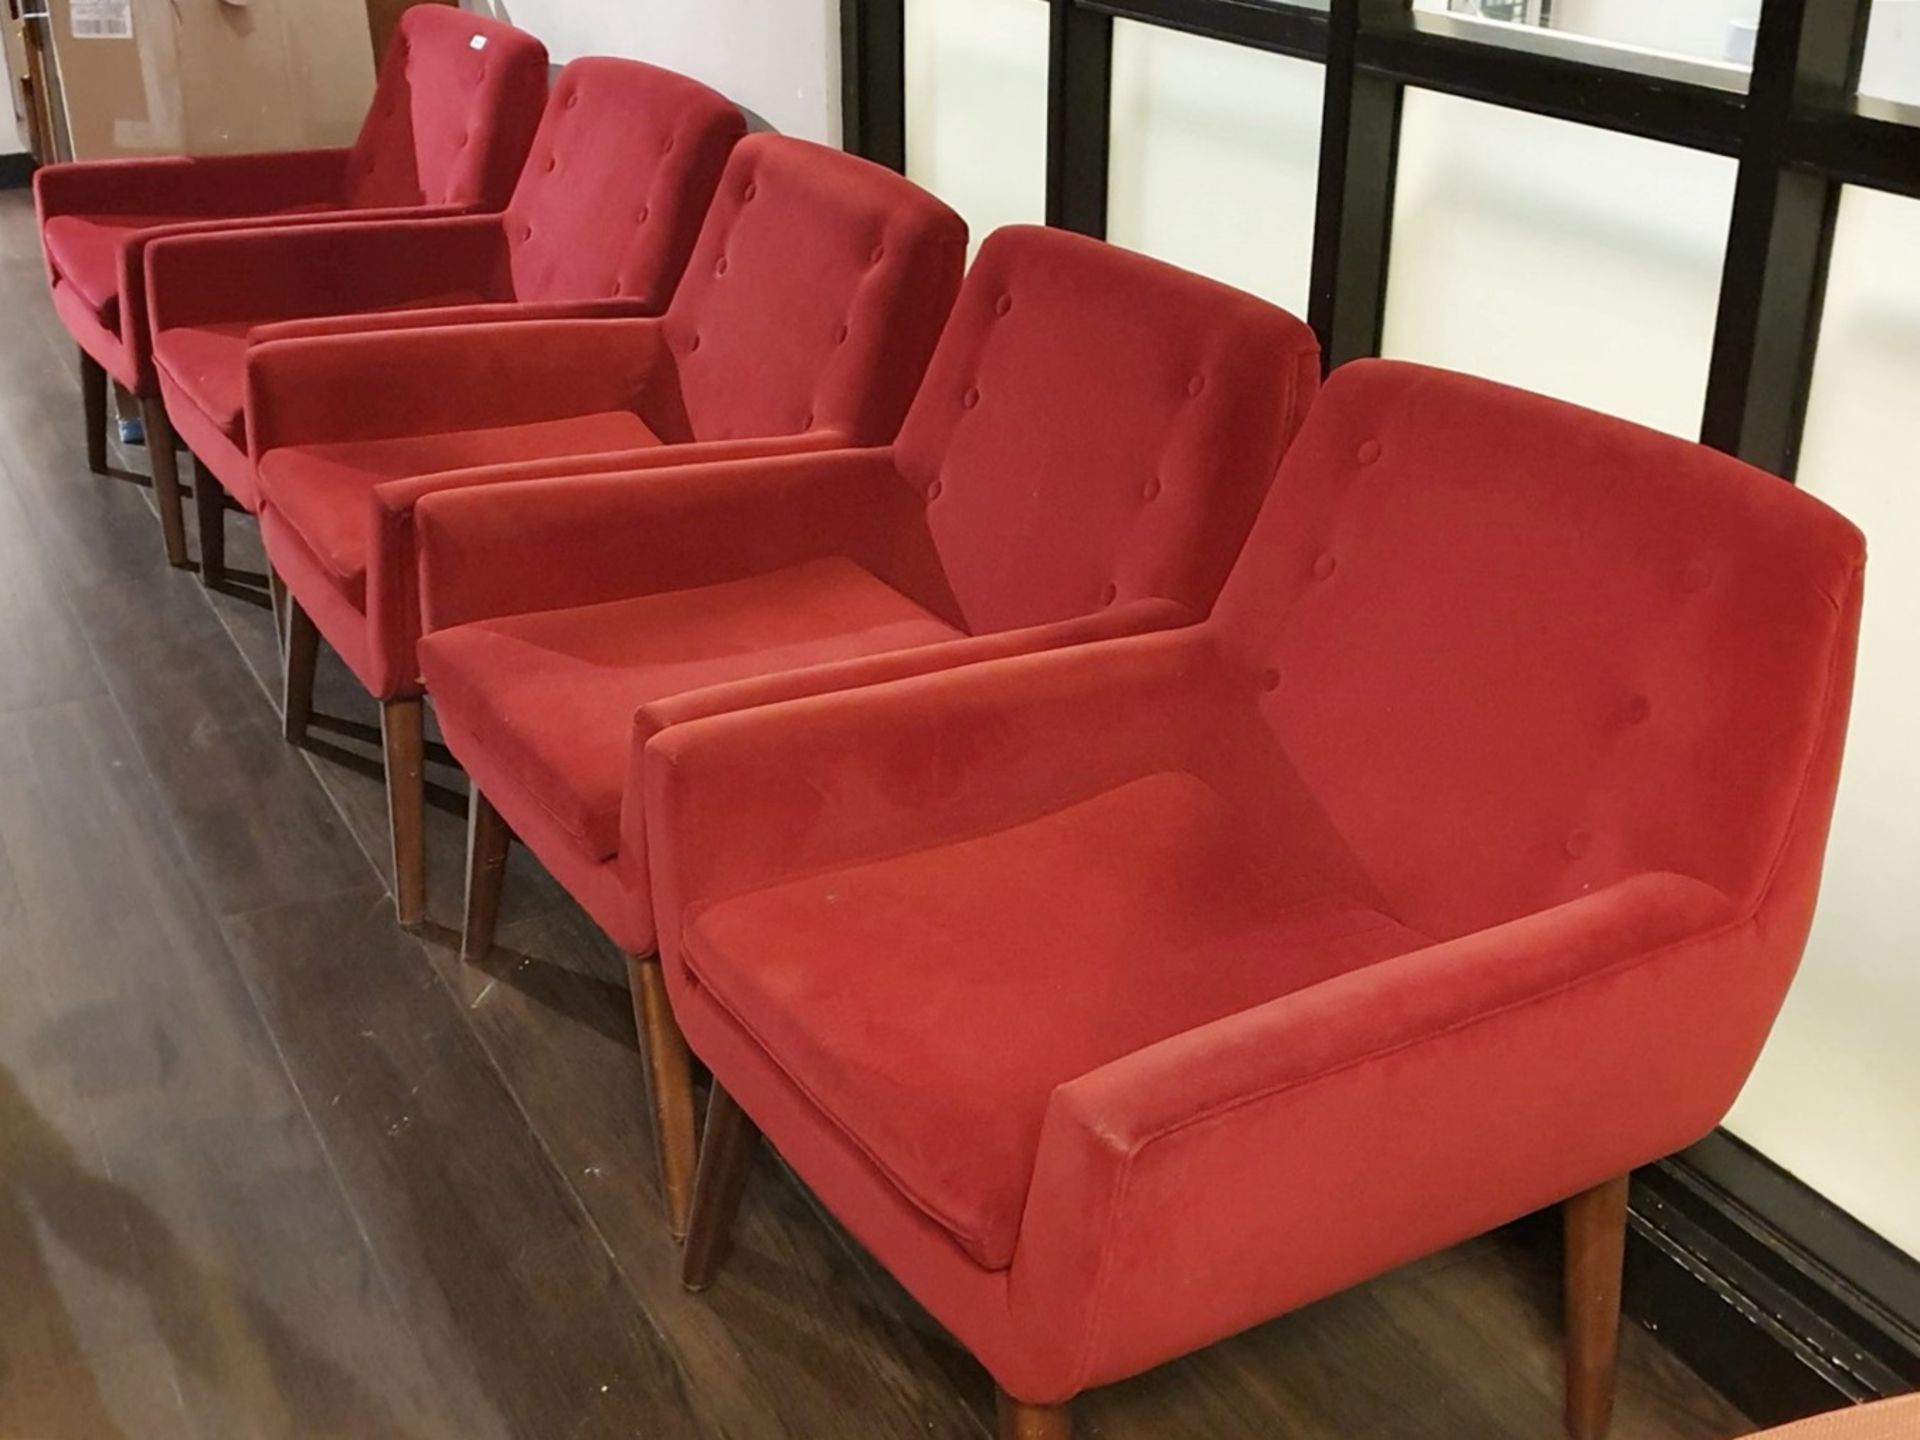 5 x Retro Style Armchairs in Red Fabric - H80/45 x W68 x D70 cms - Ref PA136 - CL463 - Location: - Bild 3 aus 3